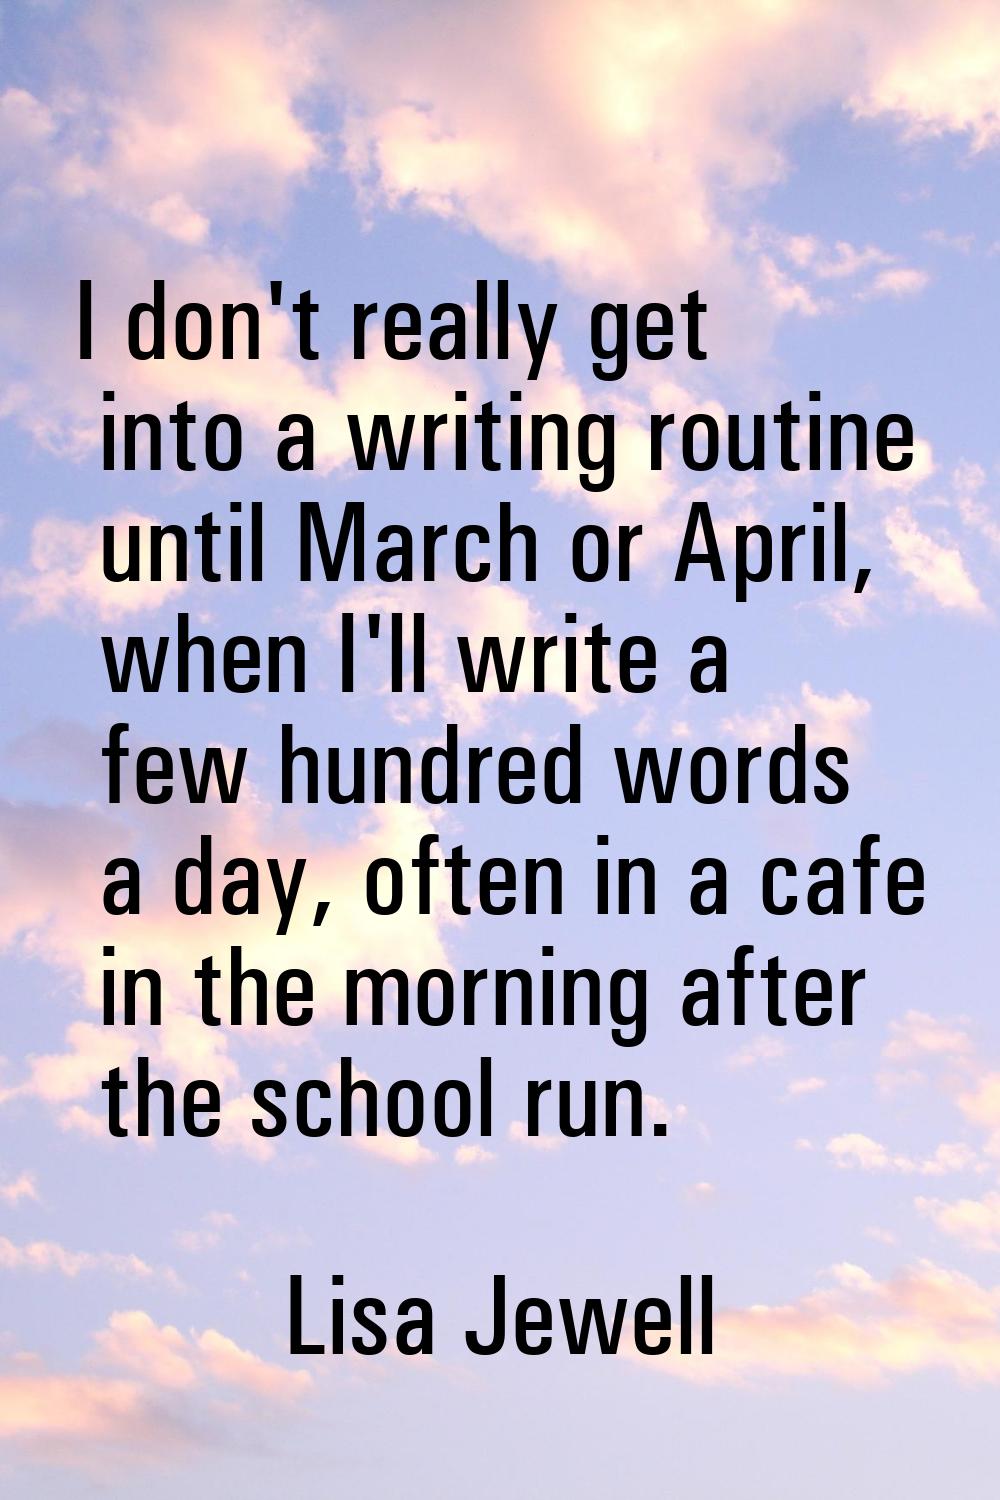 I don't really get into a writing routine until March or April, when I'll write a few hundred words